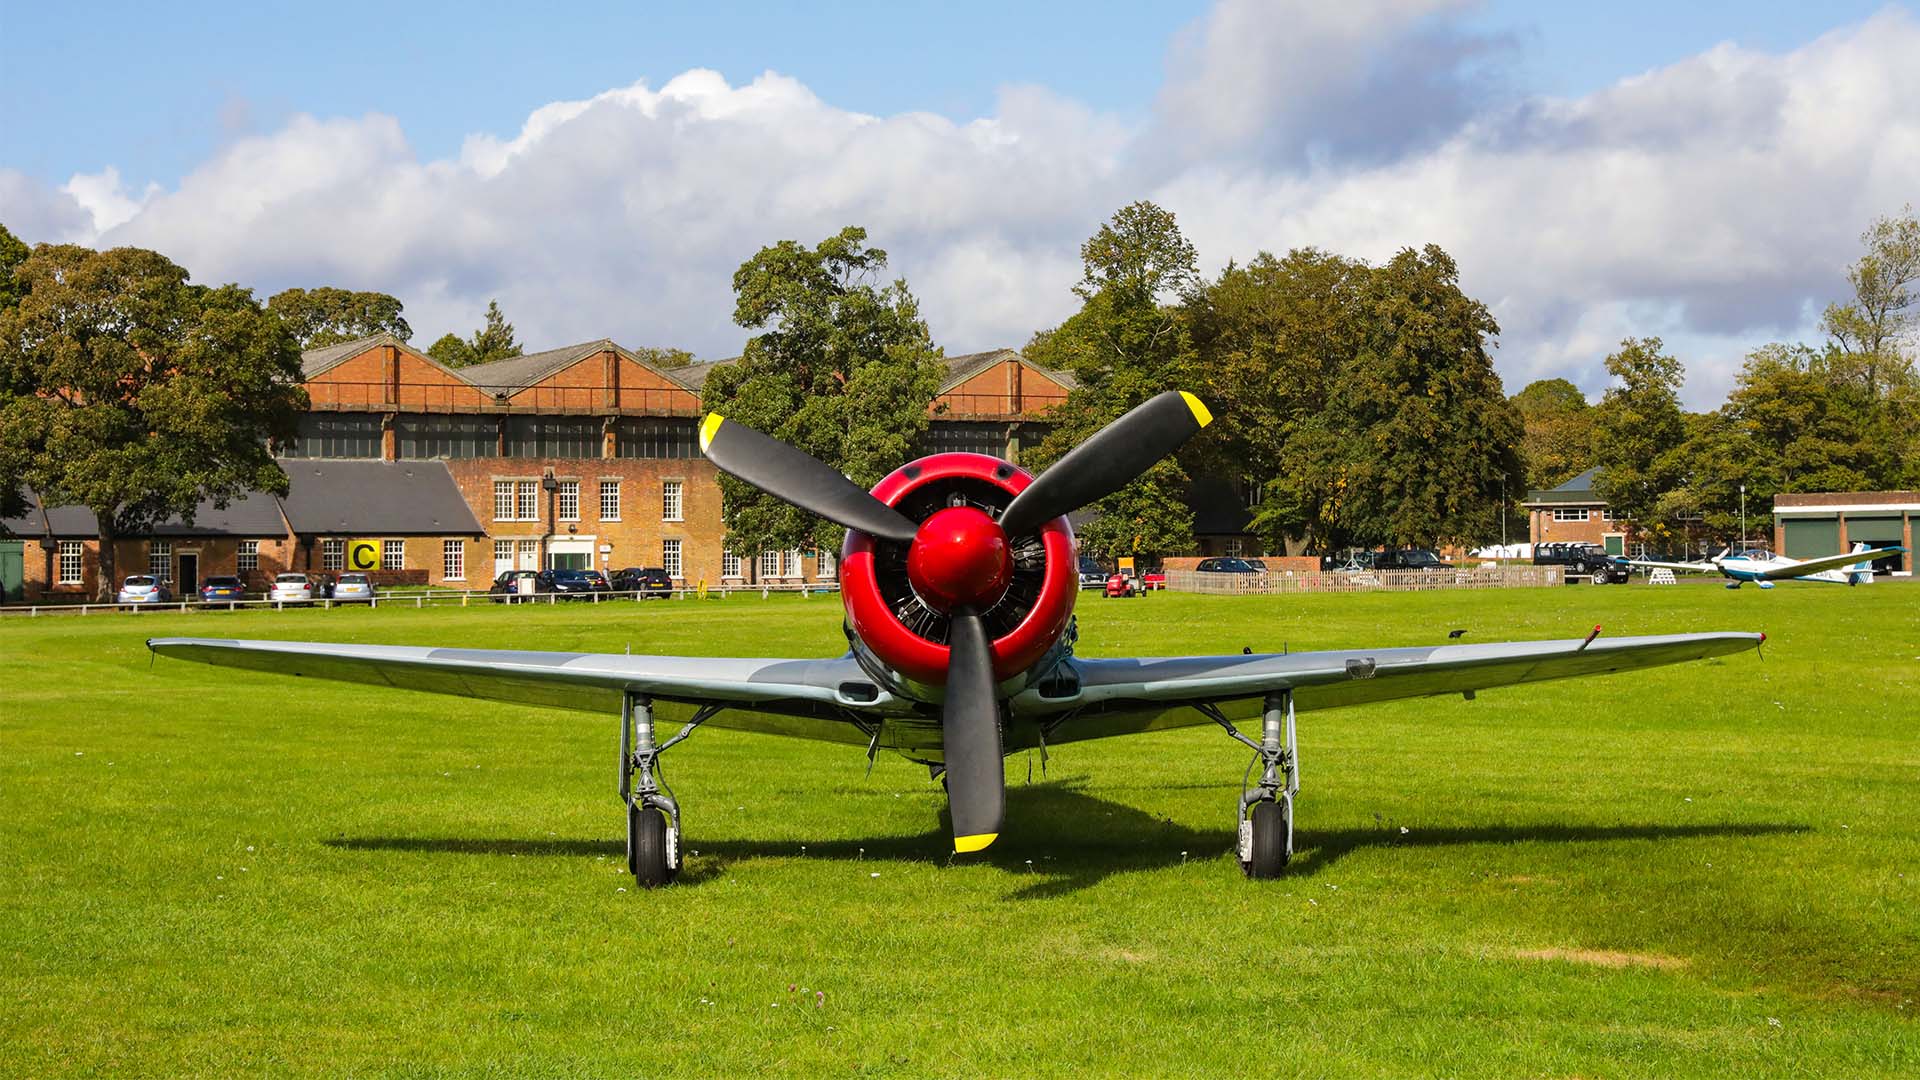 Bicester-Motion-Bicester-Heritage-Lifestyle-Bicester-138